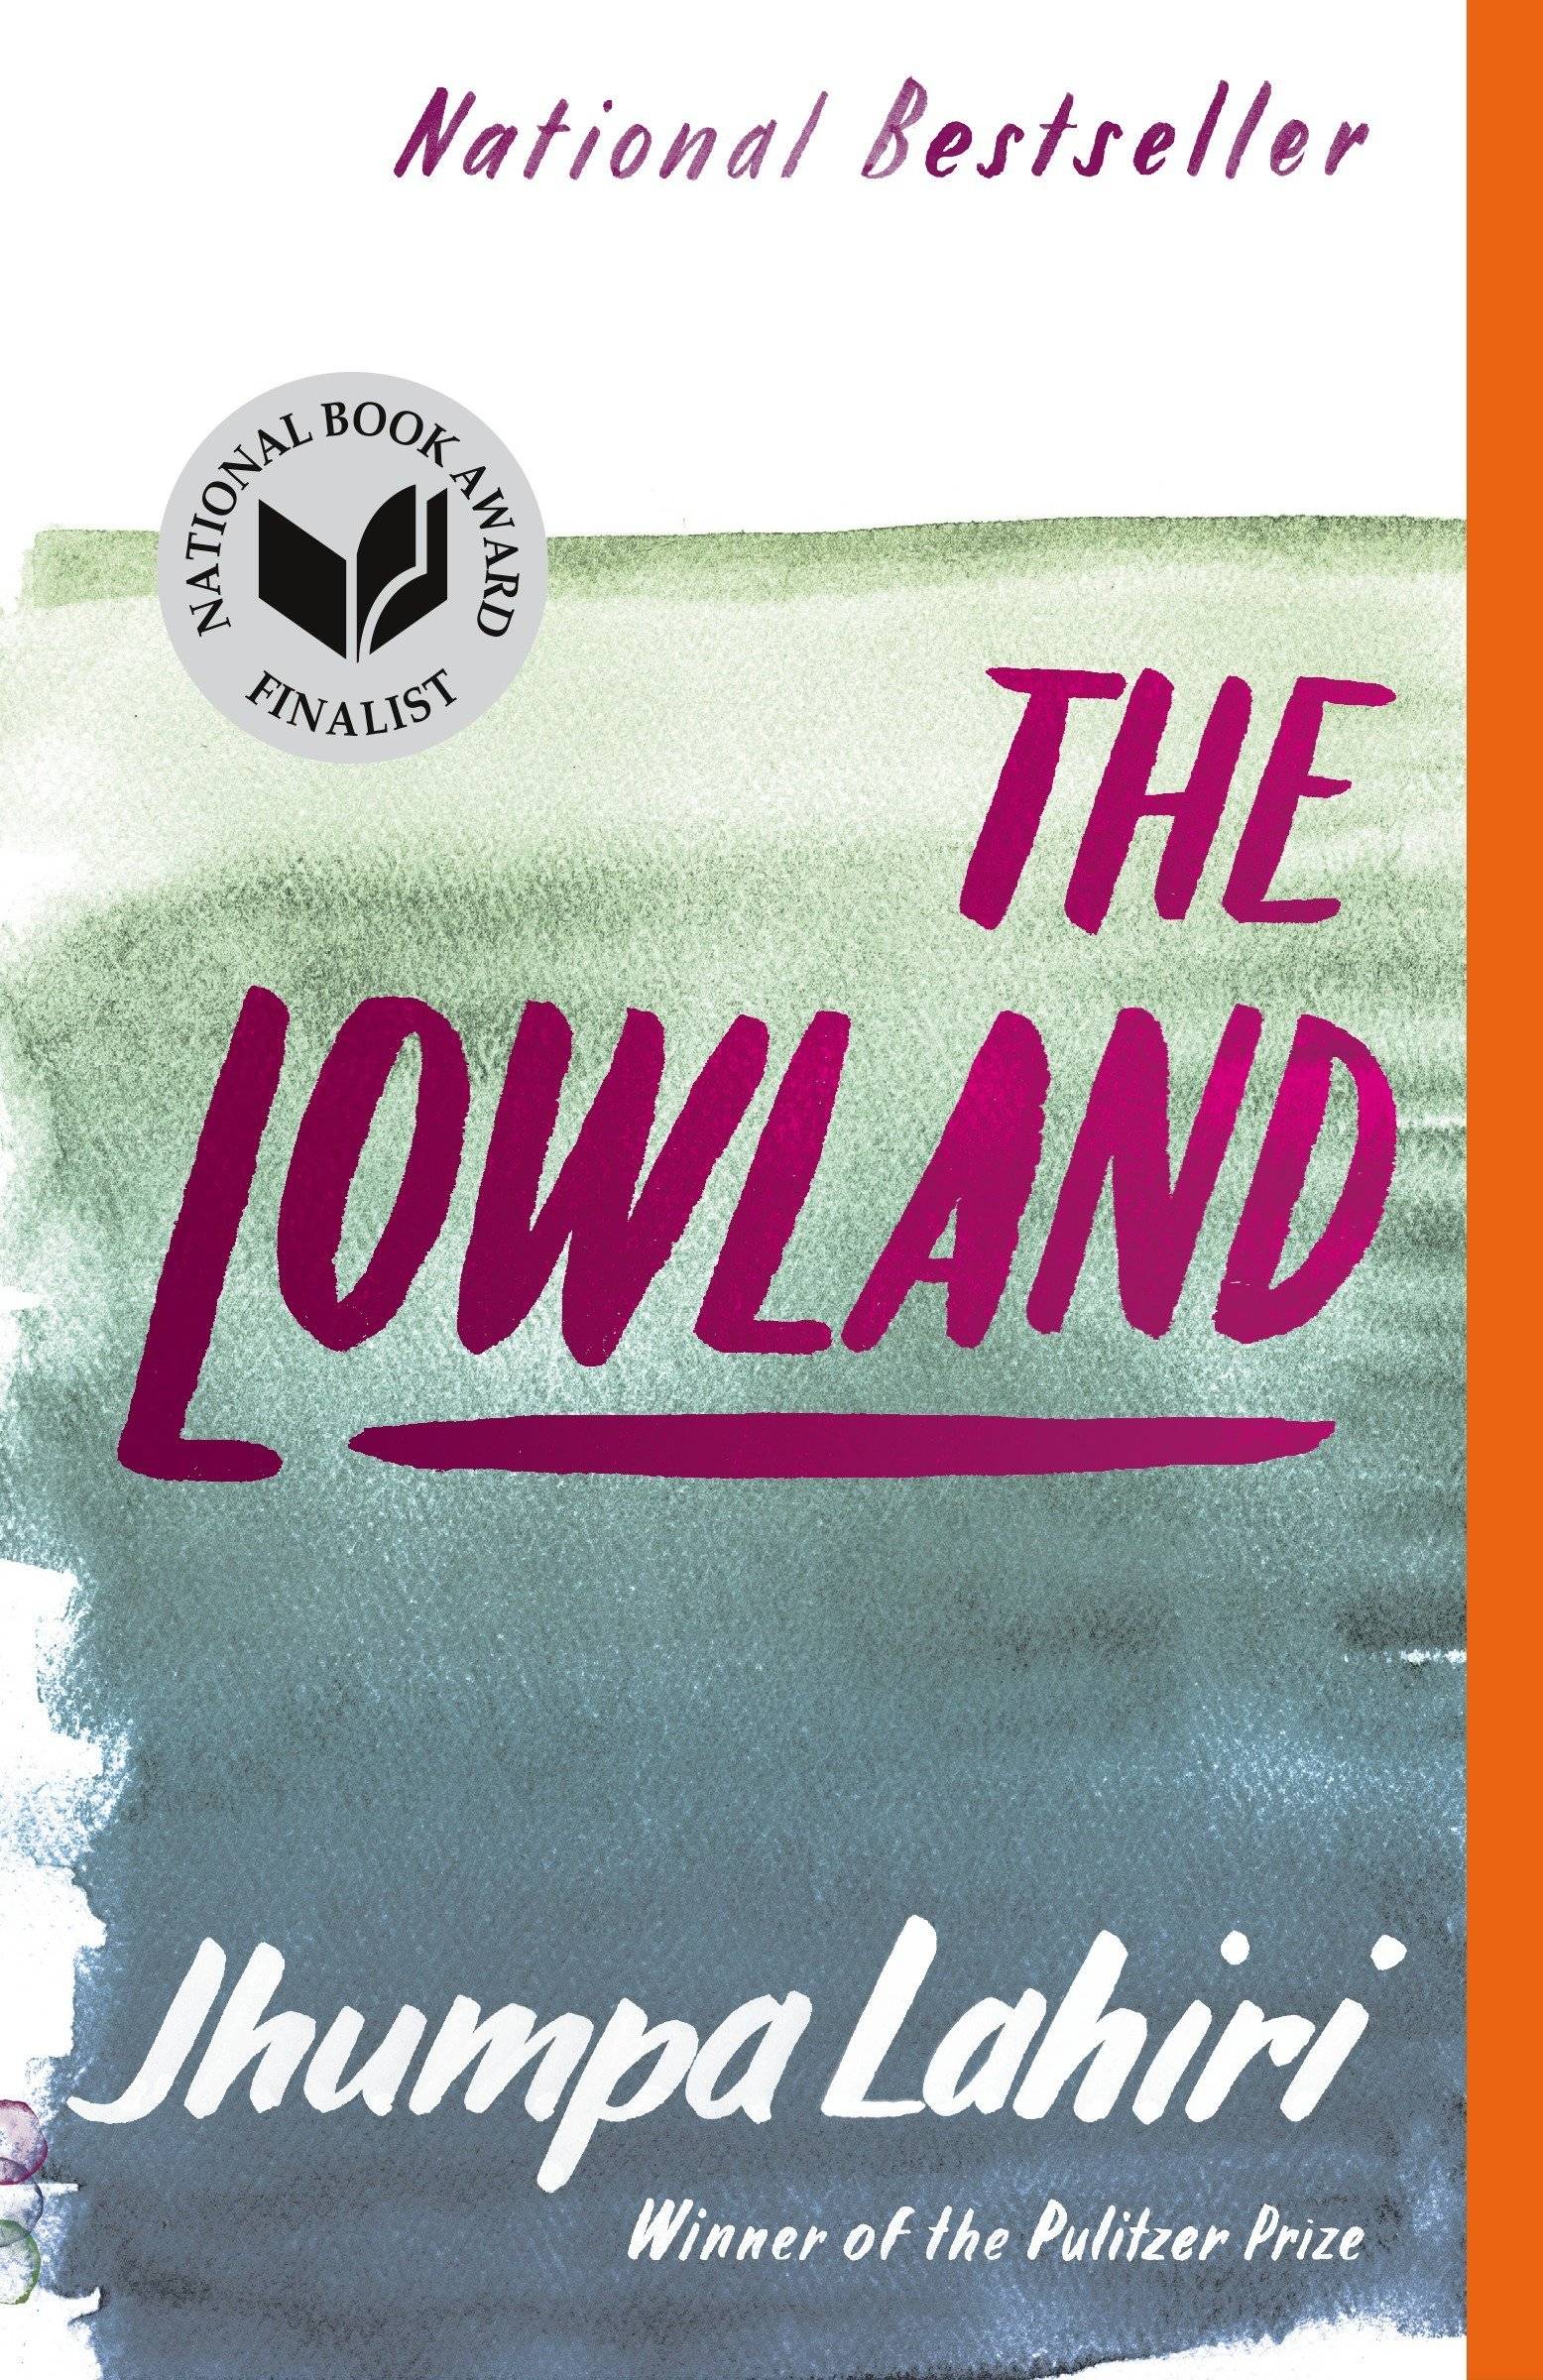 "The Lowland" book cover featuring a blue watercolor background and maroon text.